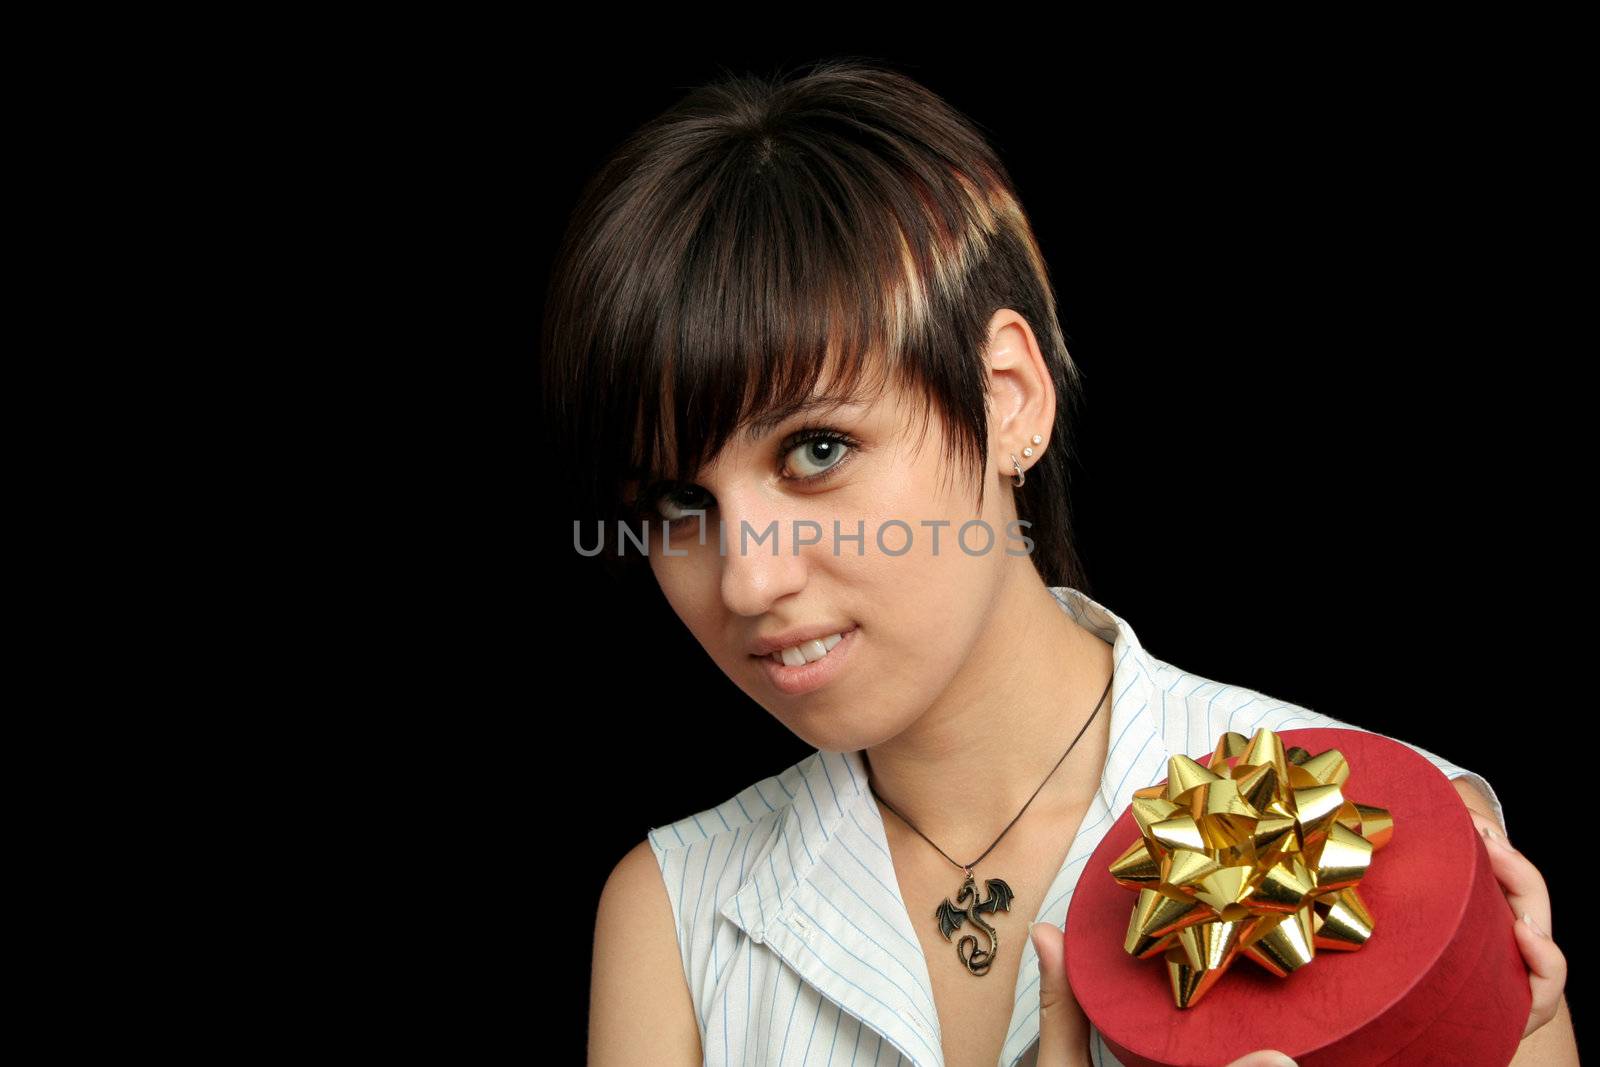 The young girl holds a box with a gift, isolated on black background